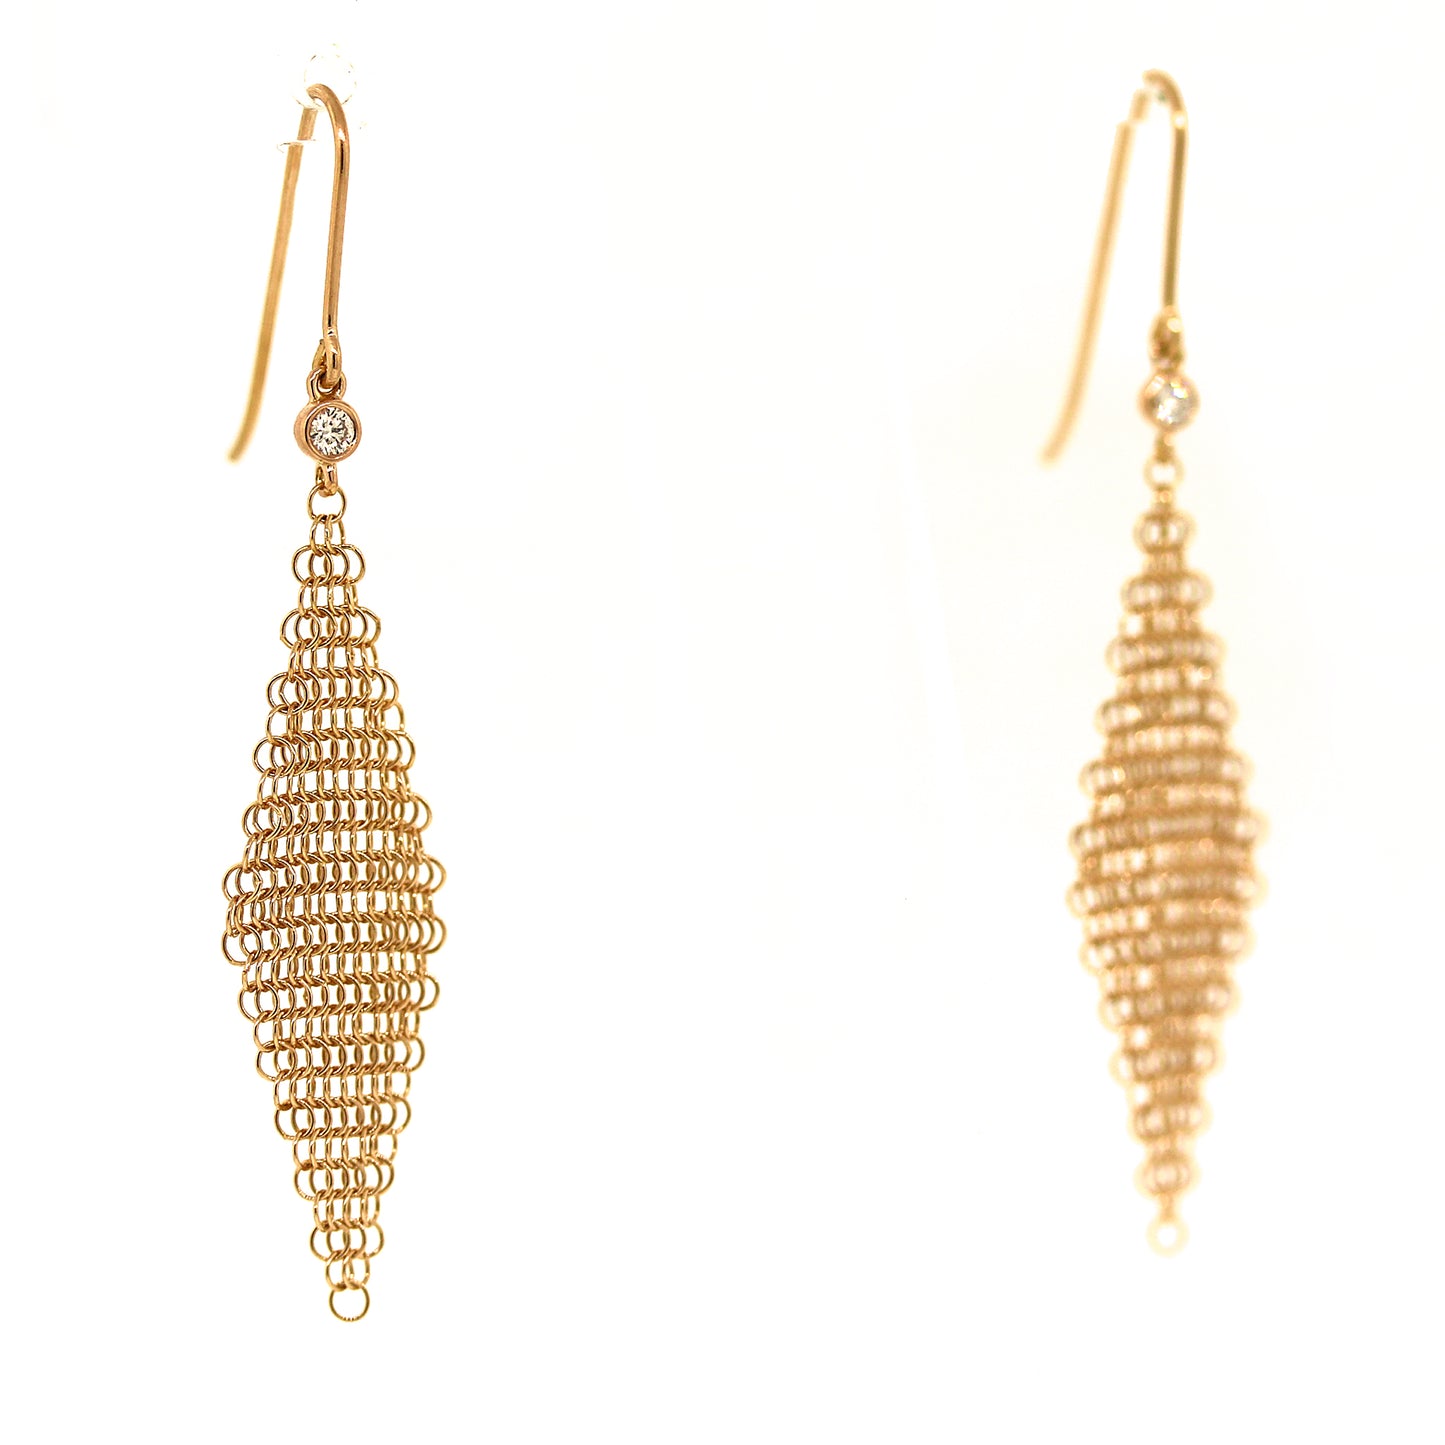 Preowned Tiffany and Co. Diamond Mesh Earrings in 18k Pink Gold